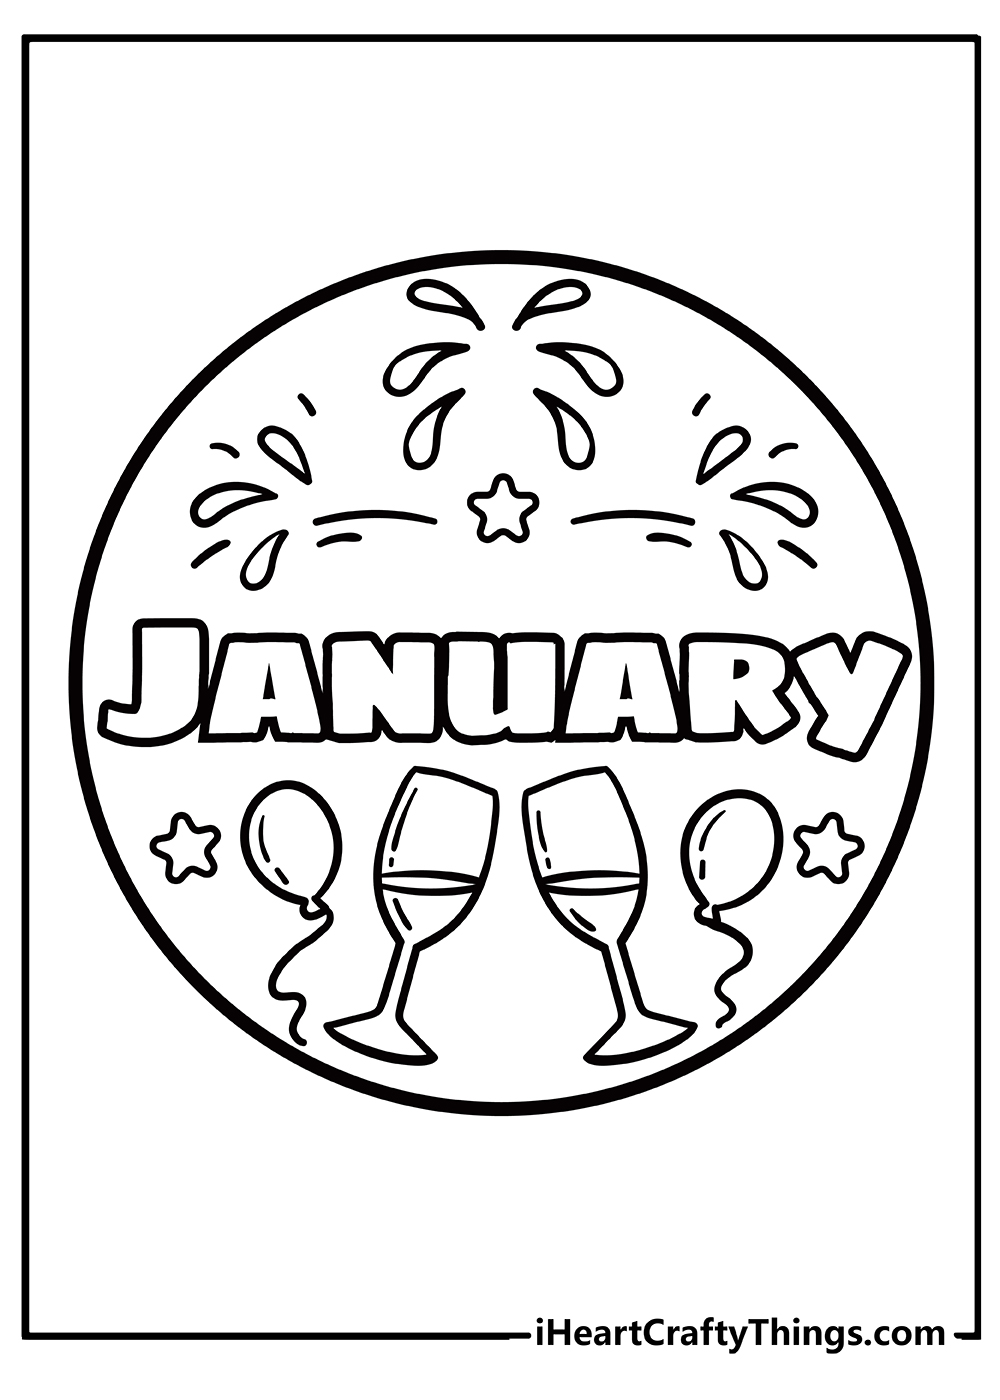 January Coloring Book for adults free download